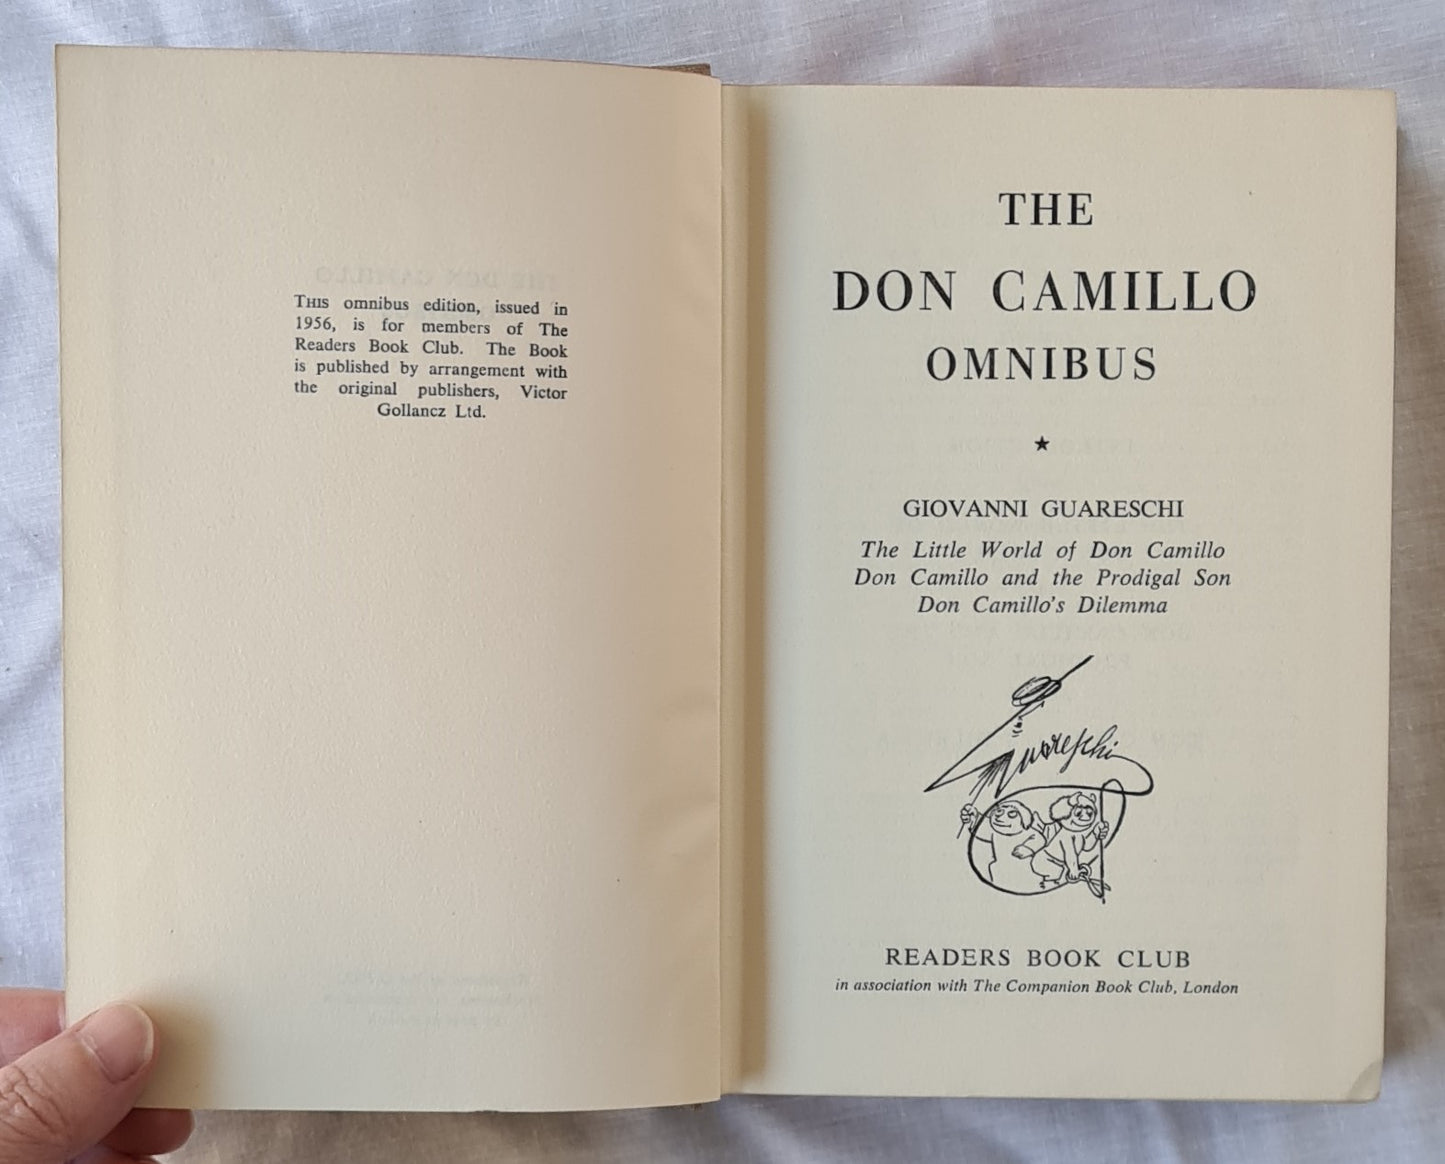 The Don Camillo Omnibus  The Little World of Don Camillo Don Camillo and the Prodigal Son Don Camillo’s Dilemma  by Giovanni Guareschi